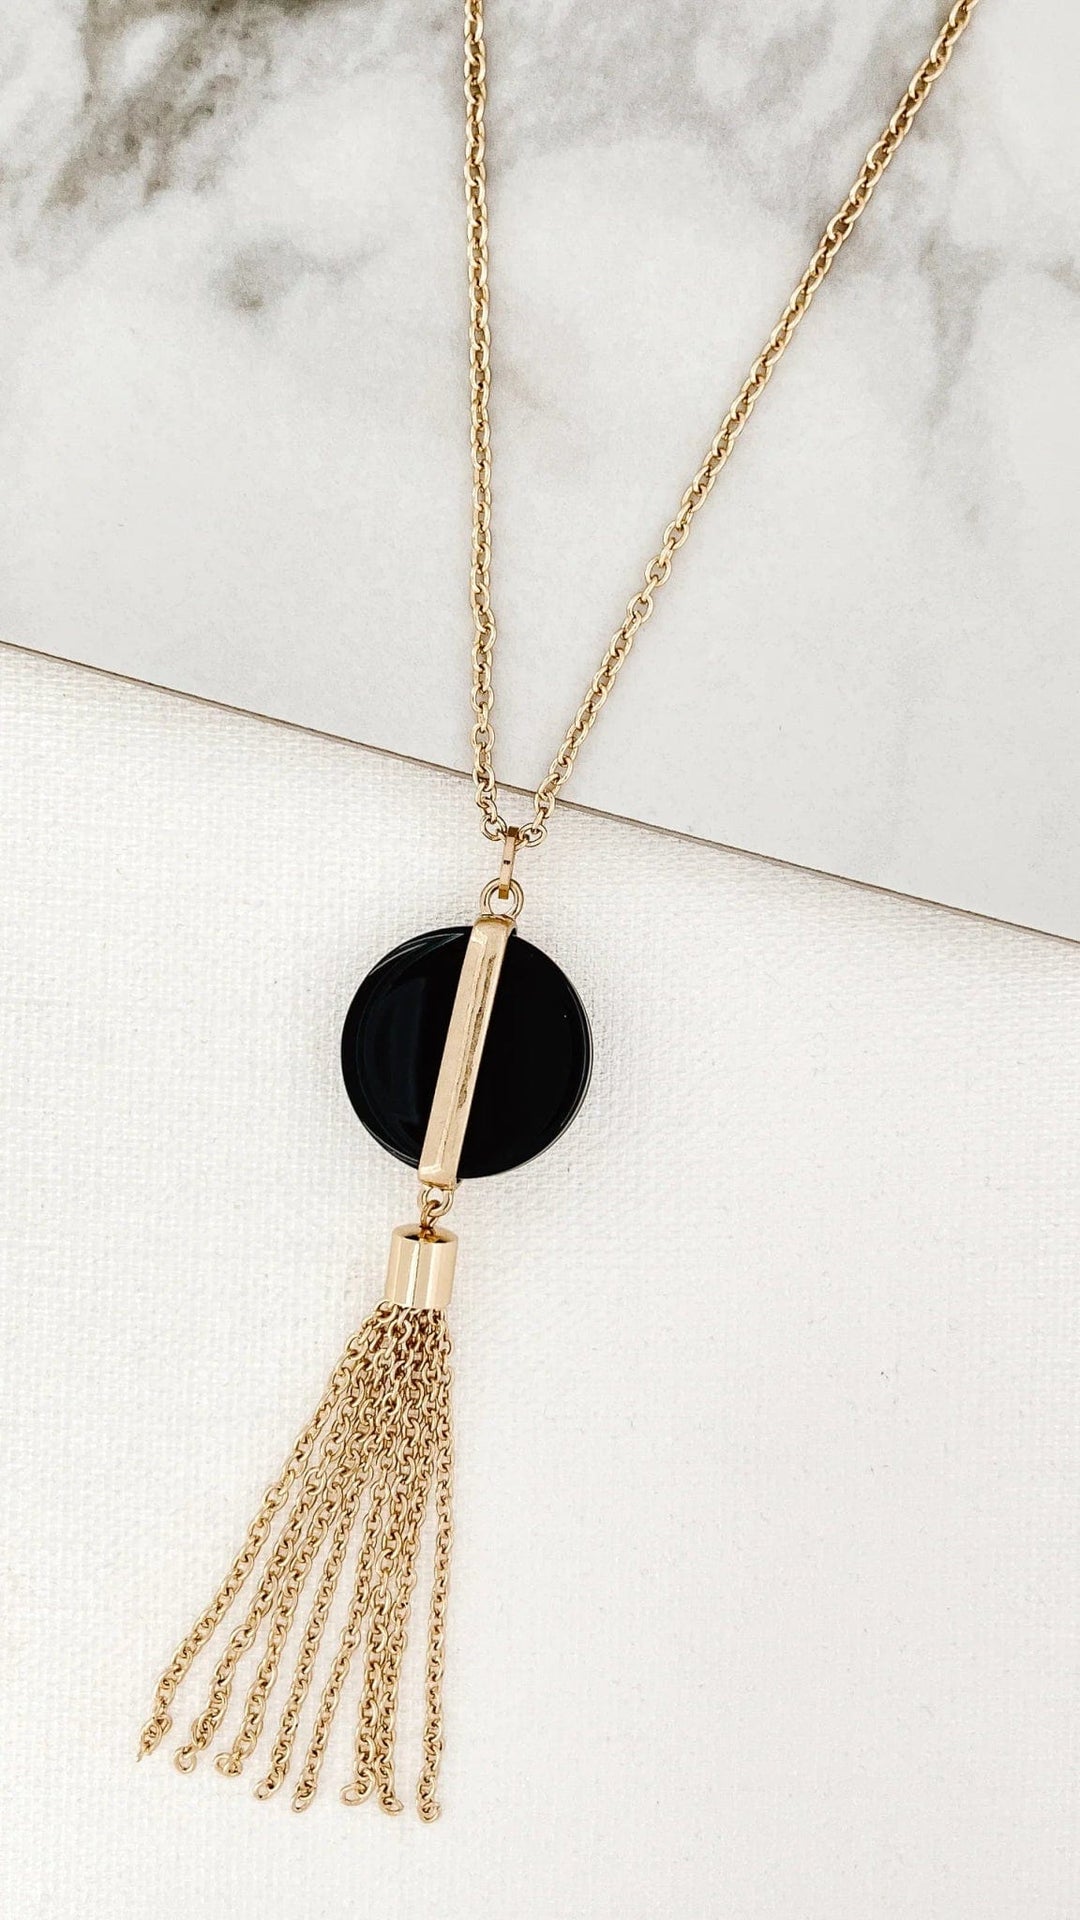 Envy Black Circle Pendent Necklace With Tassel In Gold - Crabtree Cottage